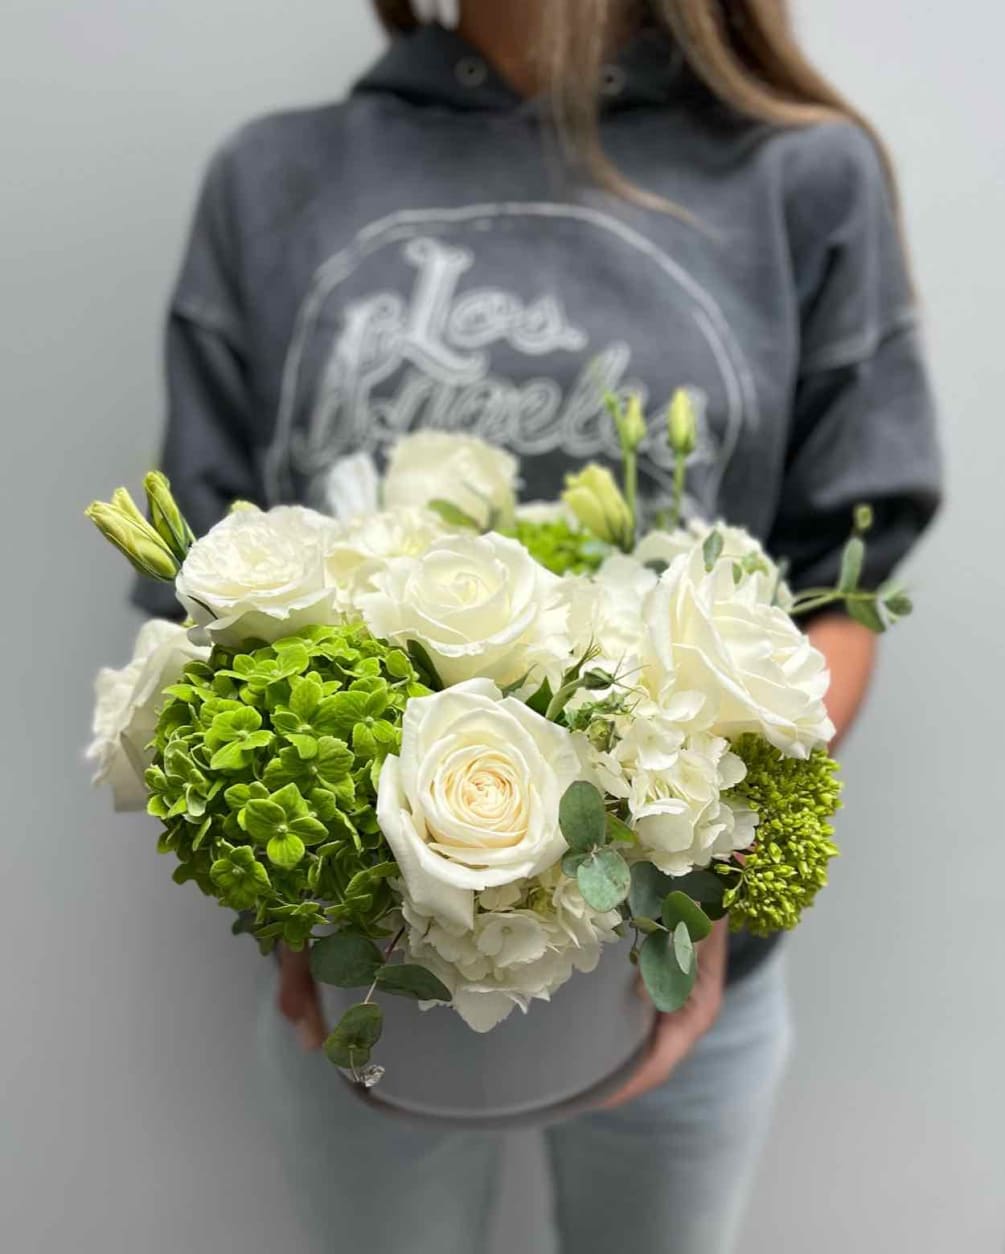 Vase of hydrangea, garden roses, carnations, lisianthus and eucalyptus.
Perfect for a dinner